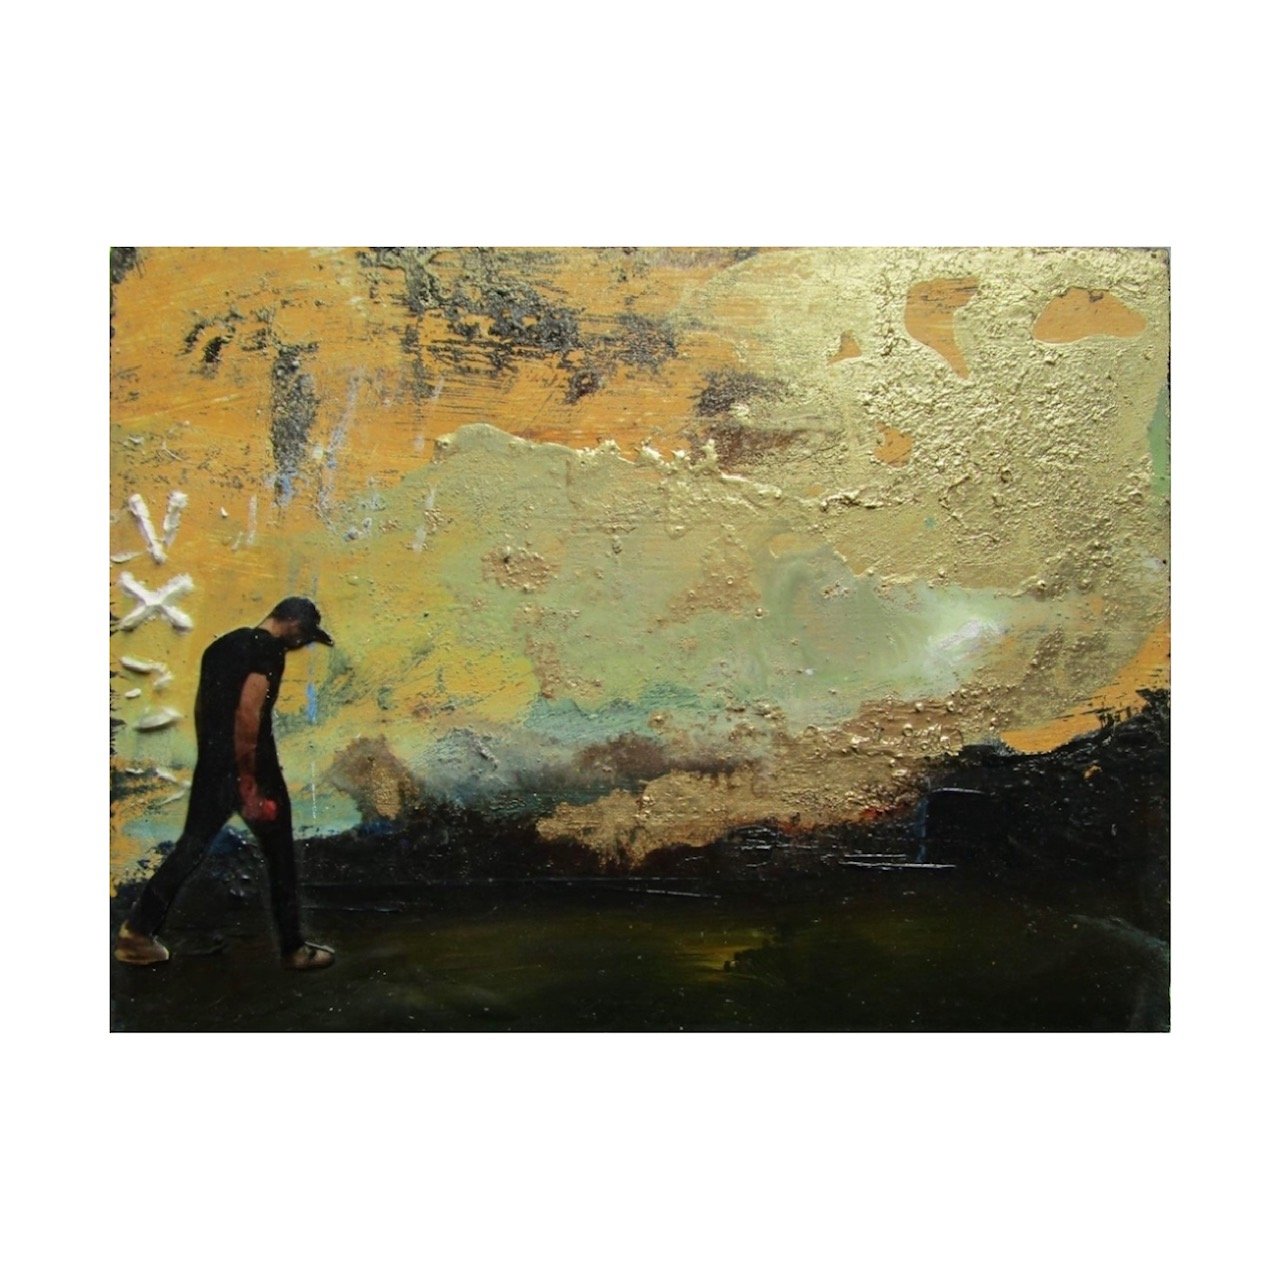 Finding Gold I - Mixed Media on Board - 12x16cm - wb.JPG